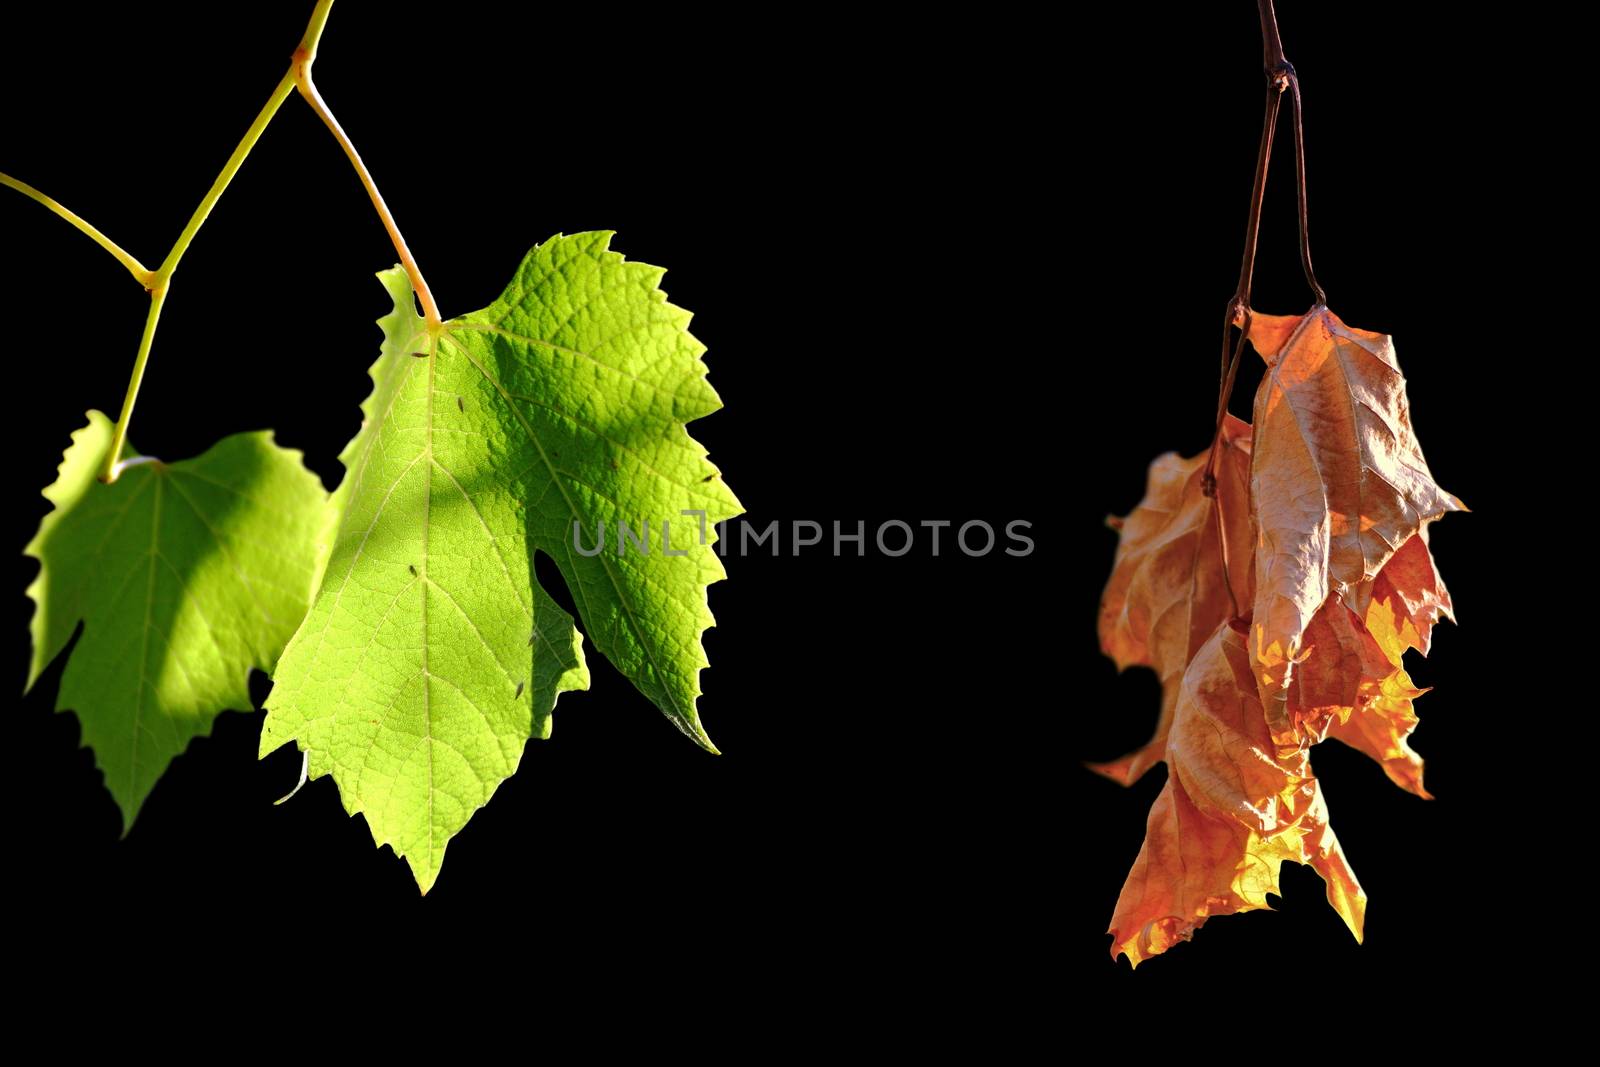 alive and dead leaves by taviphoto